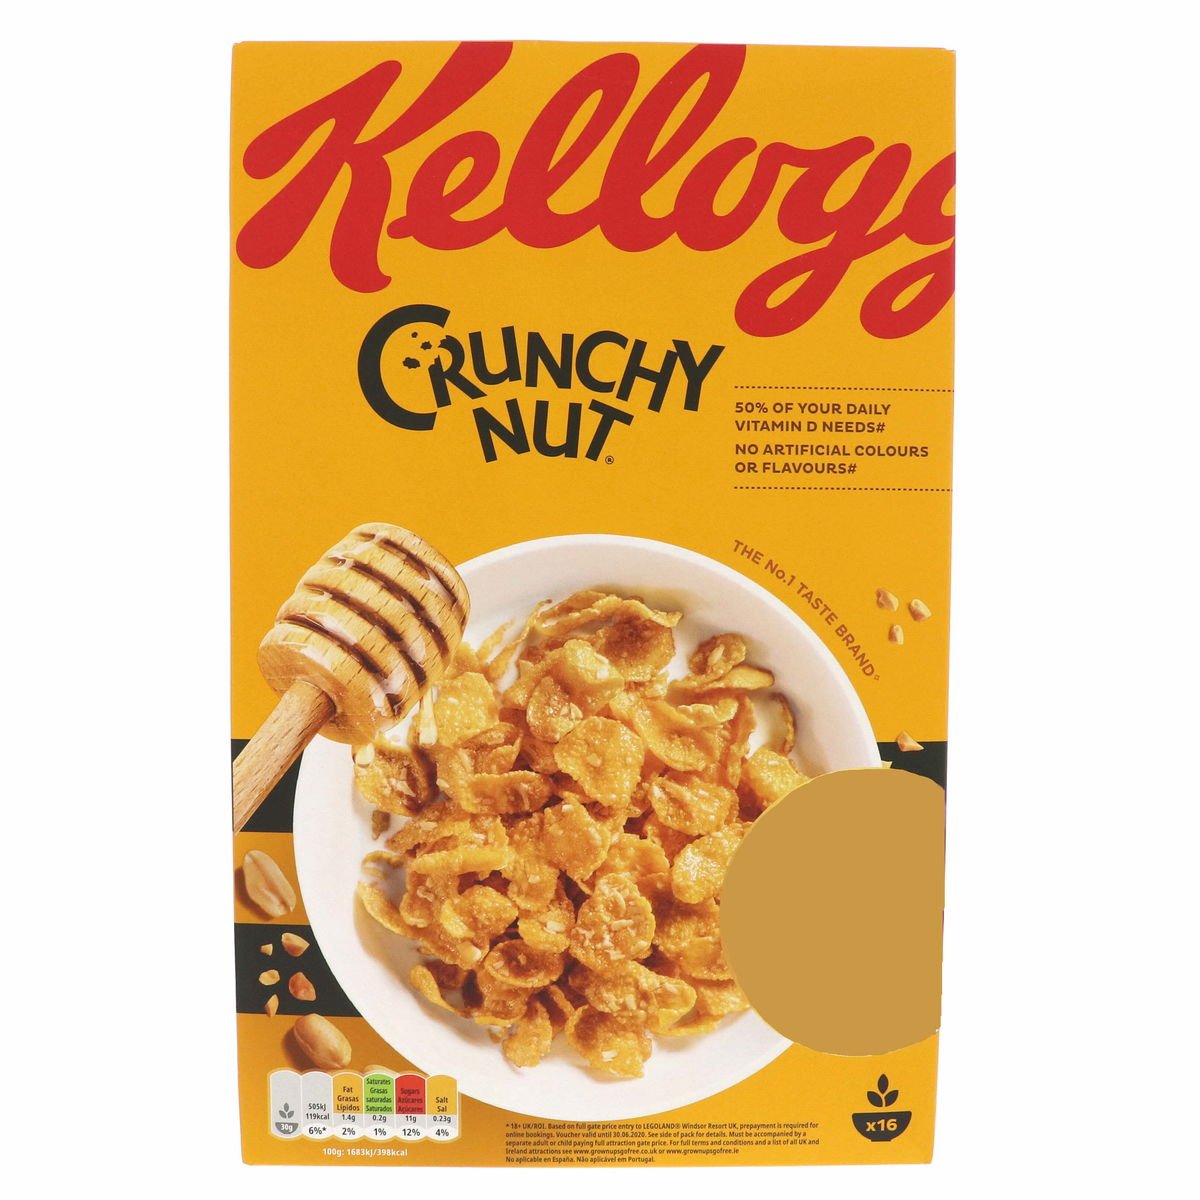 Kelloggs Crunchy Nut Chocolate Clusters Cereal 450G - Kellogg's